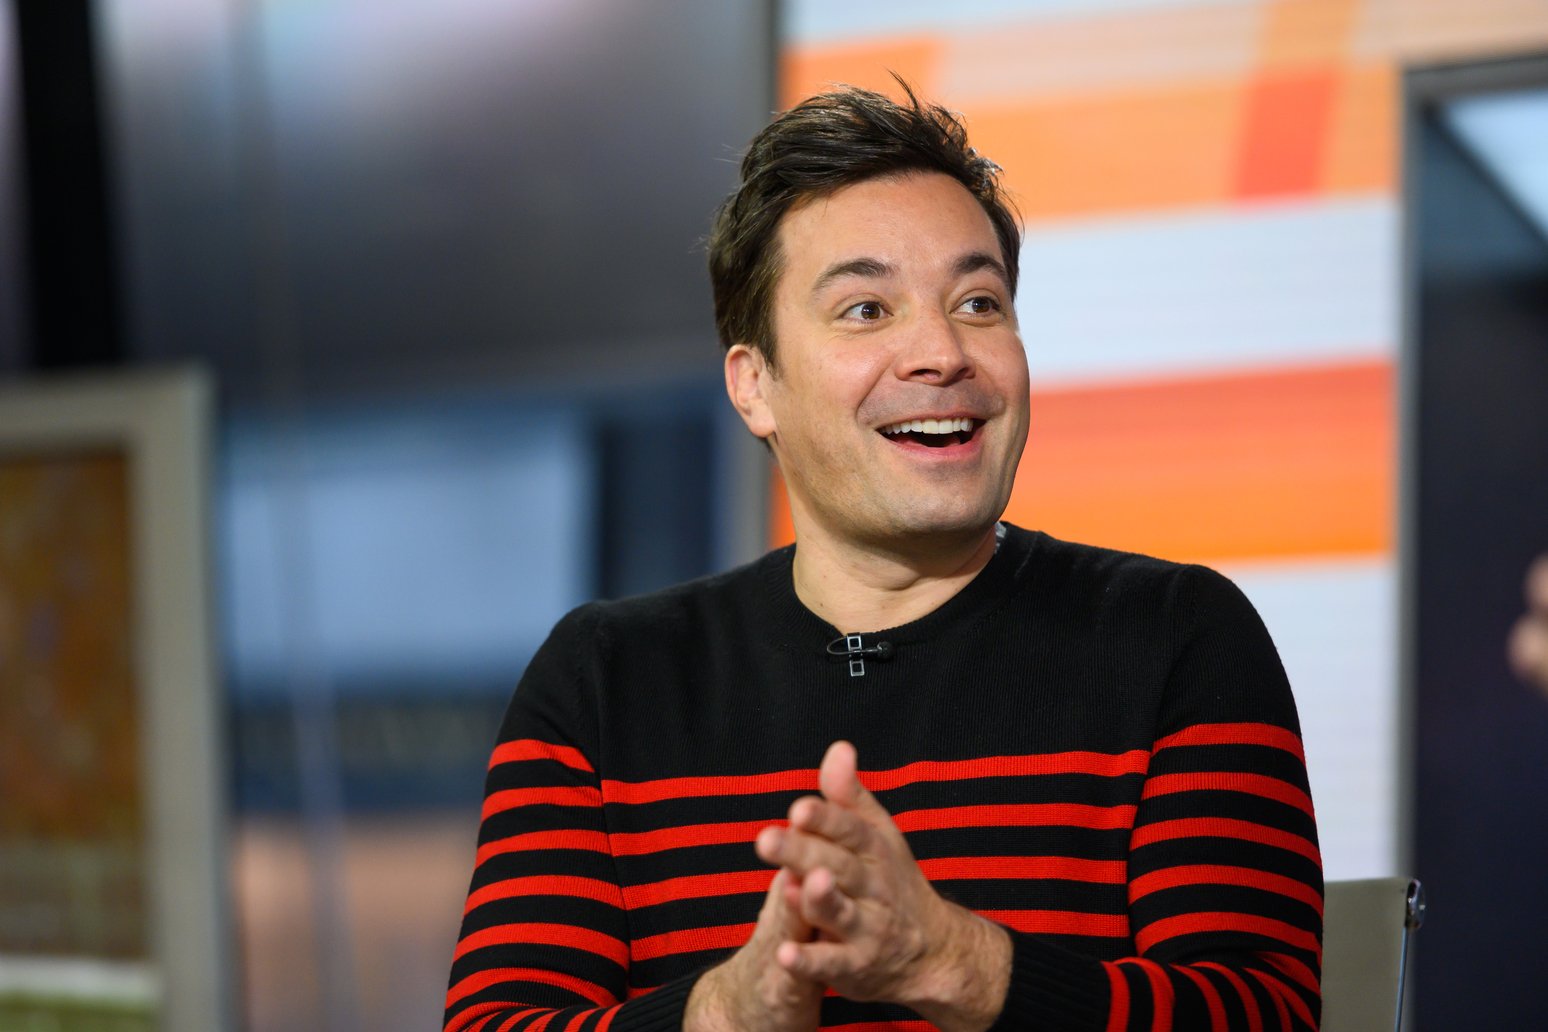 TODAY -- Pictured: Jimmy Fallon on Tuesday, January 28, 2020 | Photo: GettyImages